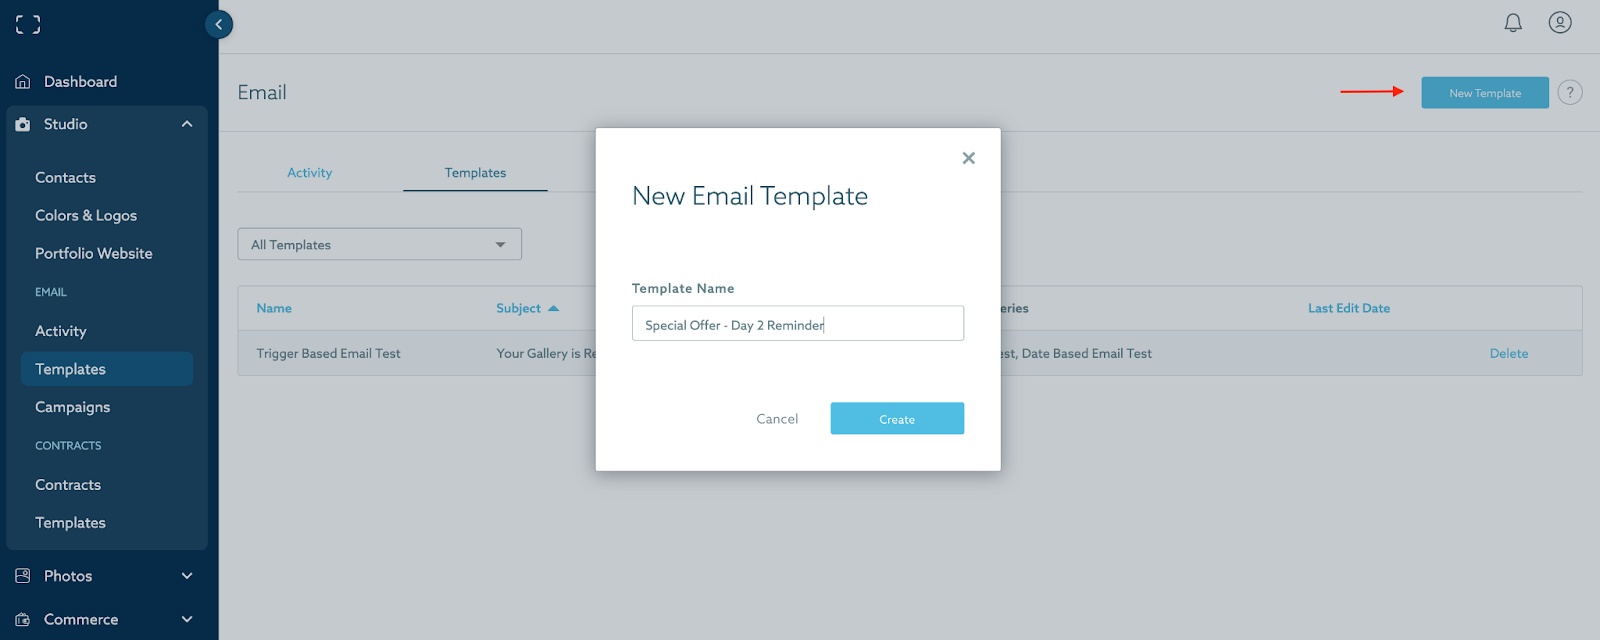 View of ShootProof studio and how to create a new email template